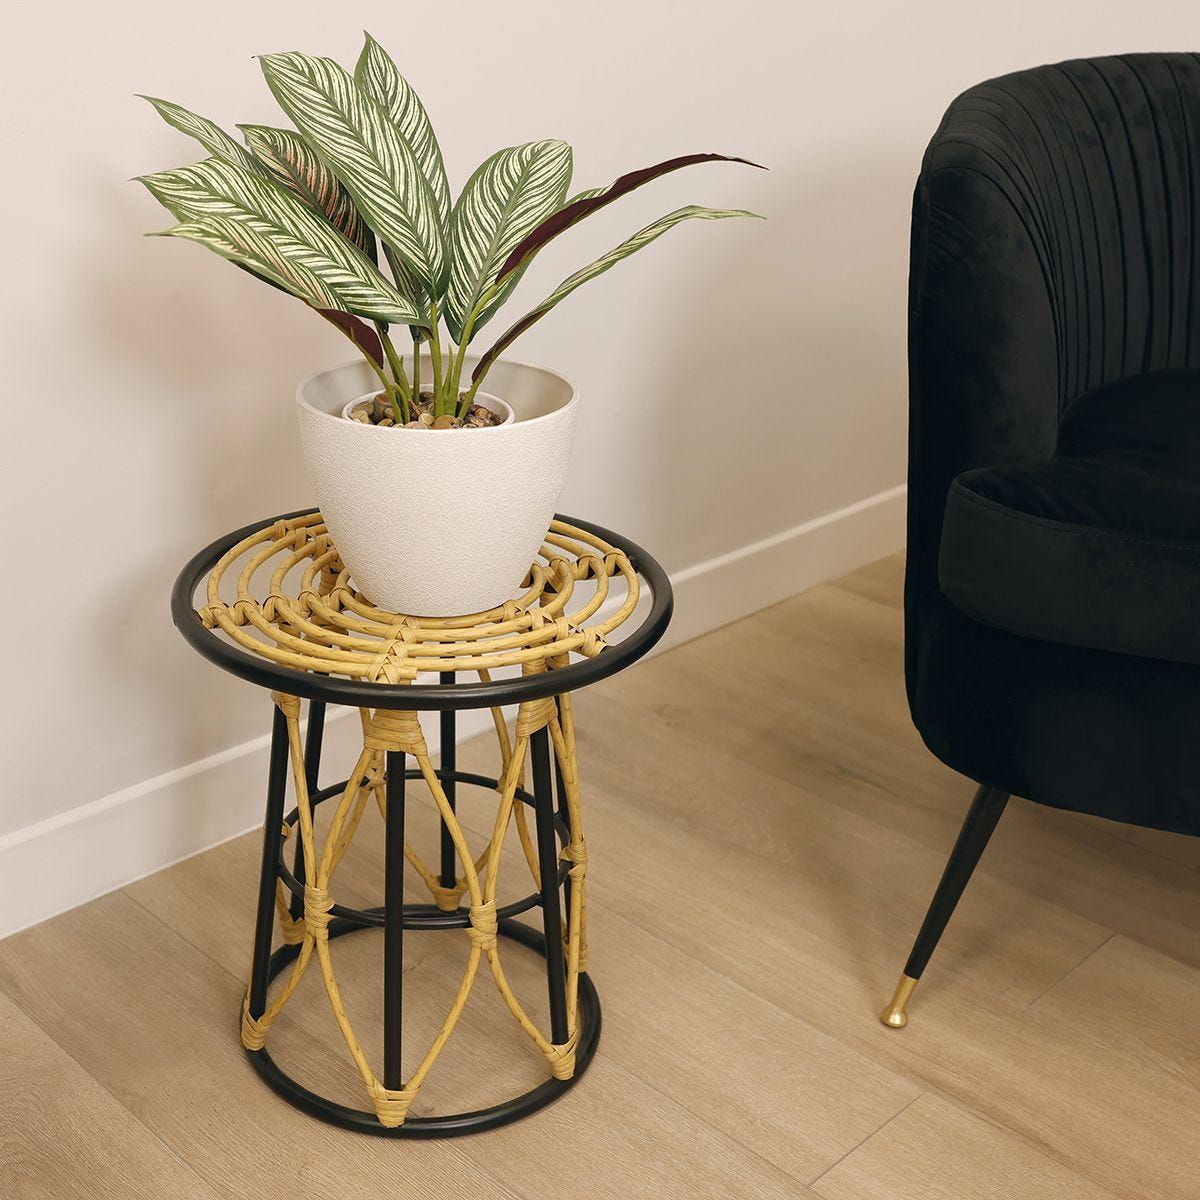 Charles Bentley Flat Top Casablanca Plant Stand | Charles Bentley Intended For Plant Stands With Side Table (View 13 of 15)